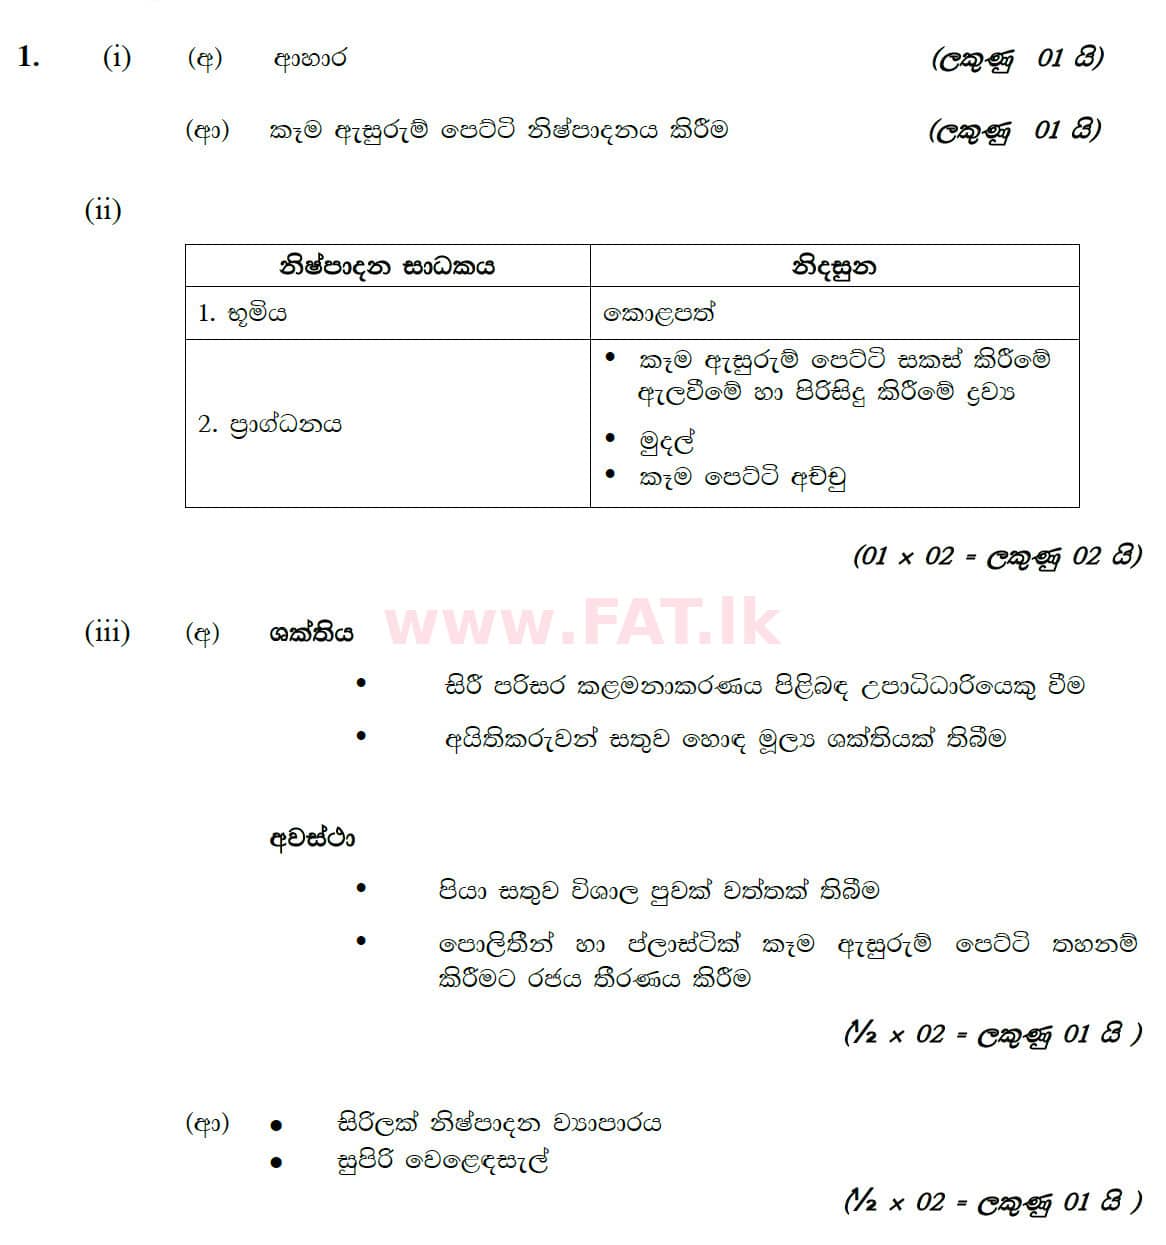 National Syllabus : Ordinary Level (O/L) Business and Accounting Studies - 2020 March - Paper II (සිංහල Medium) 1 5756